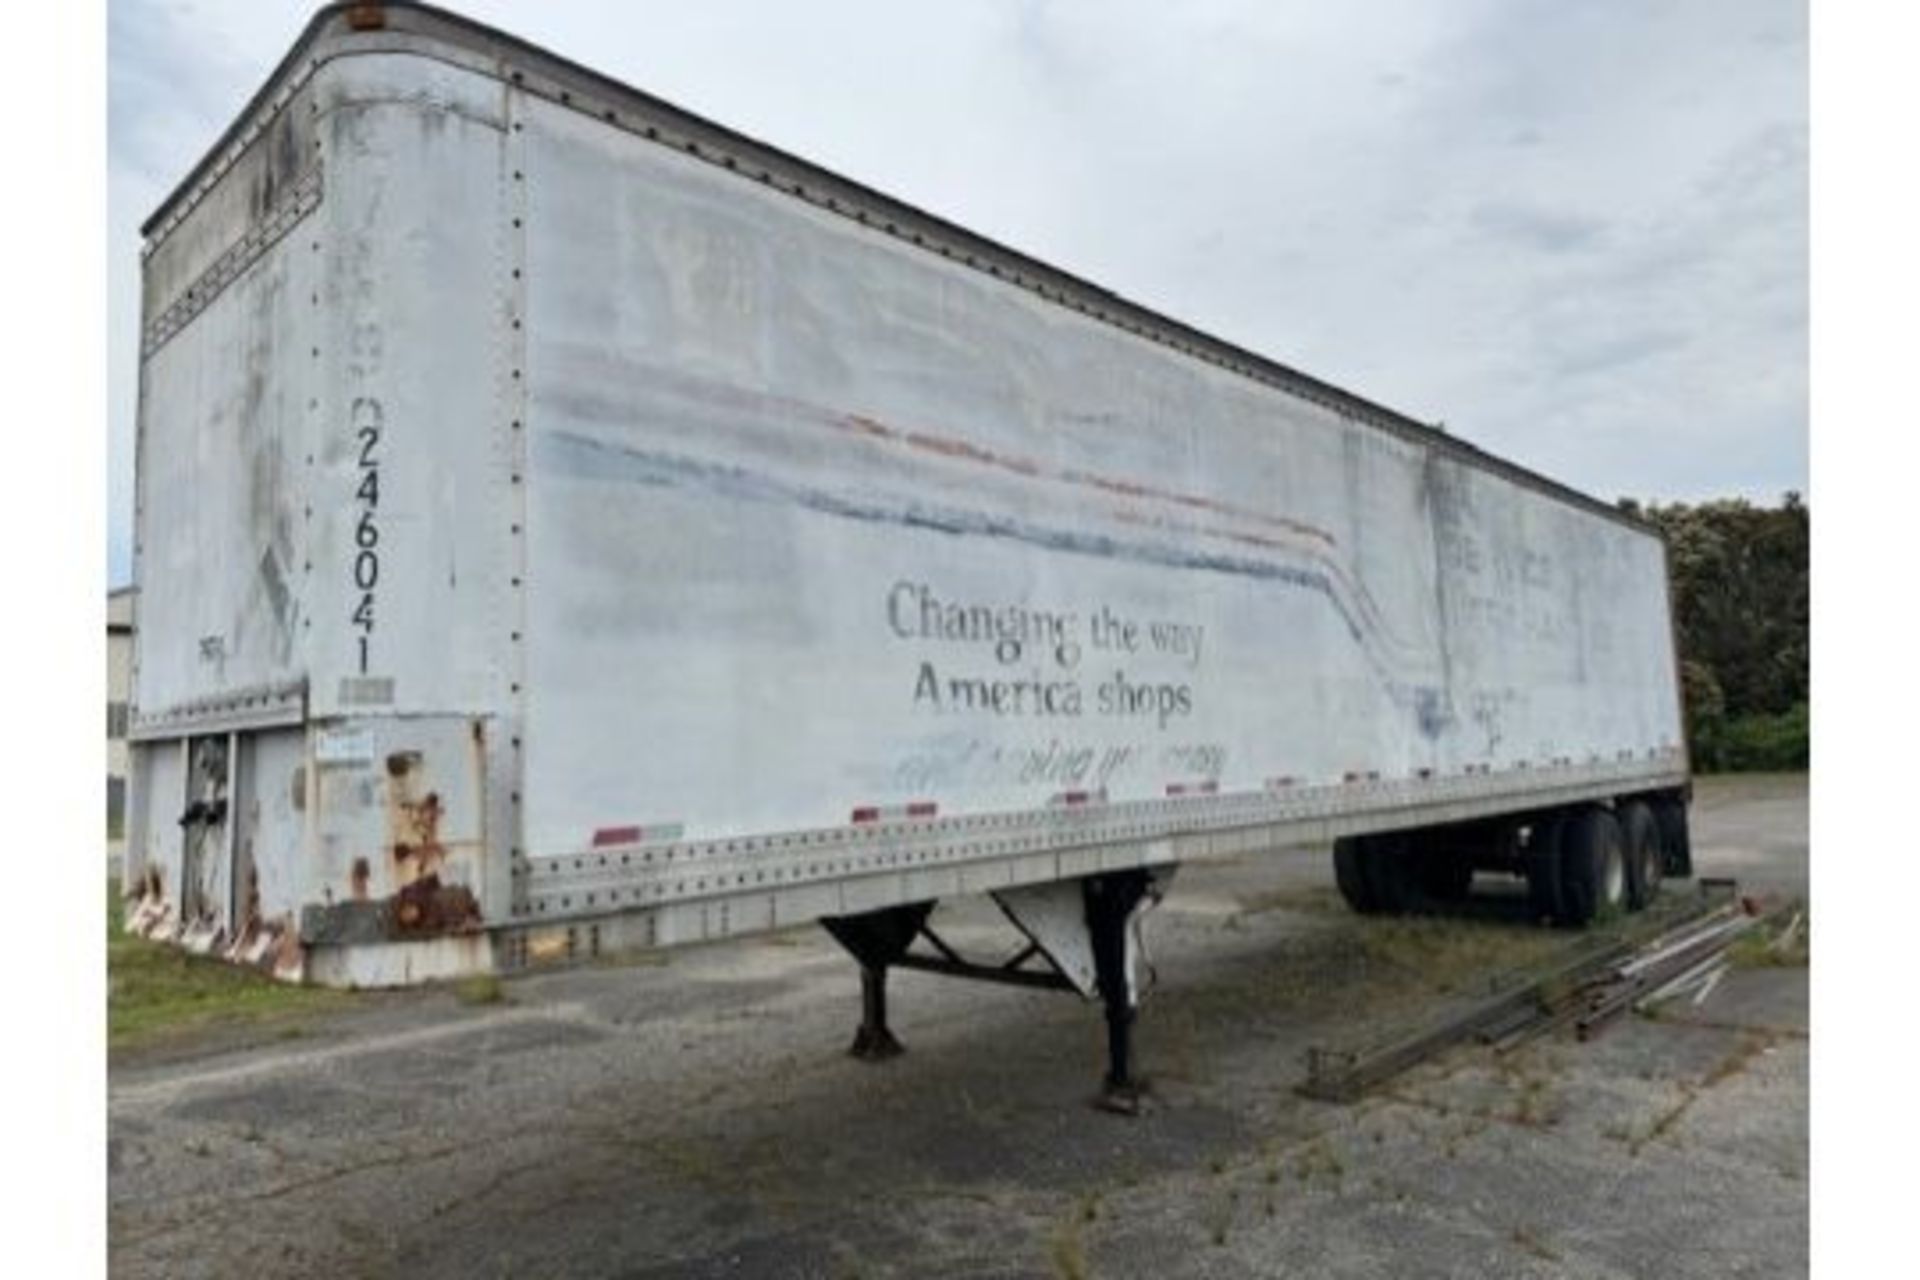 Approx. 53 ft. Dry Van Trailer with Like New Roll Up Door